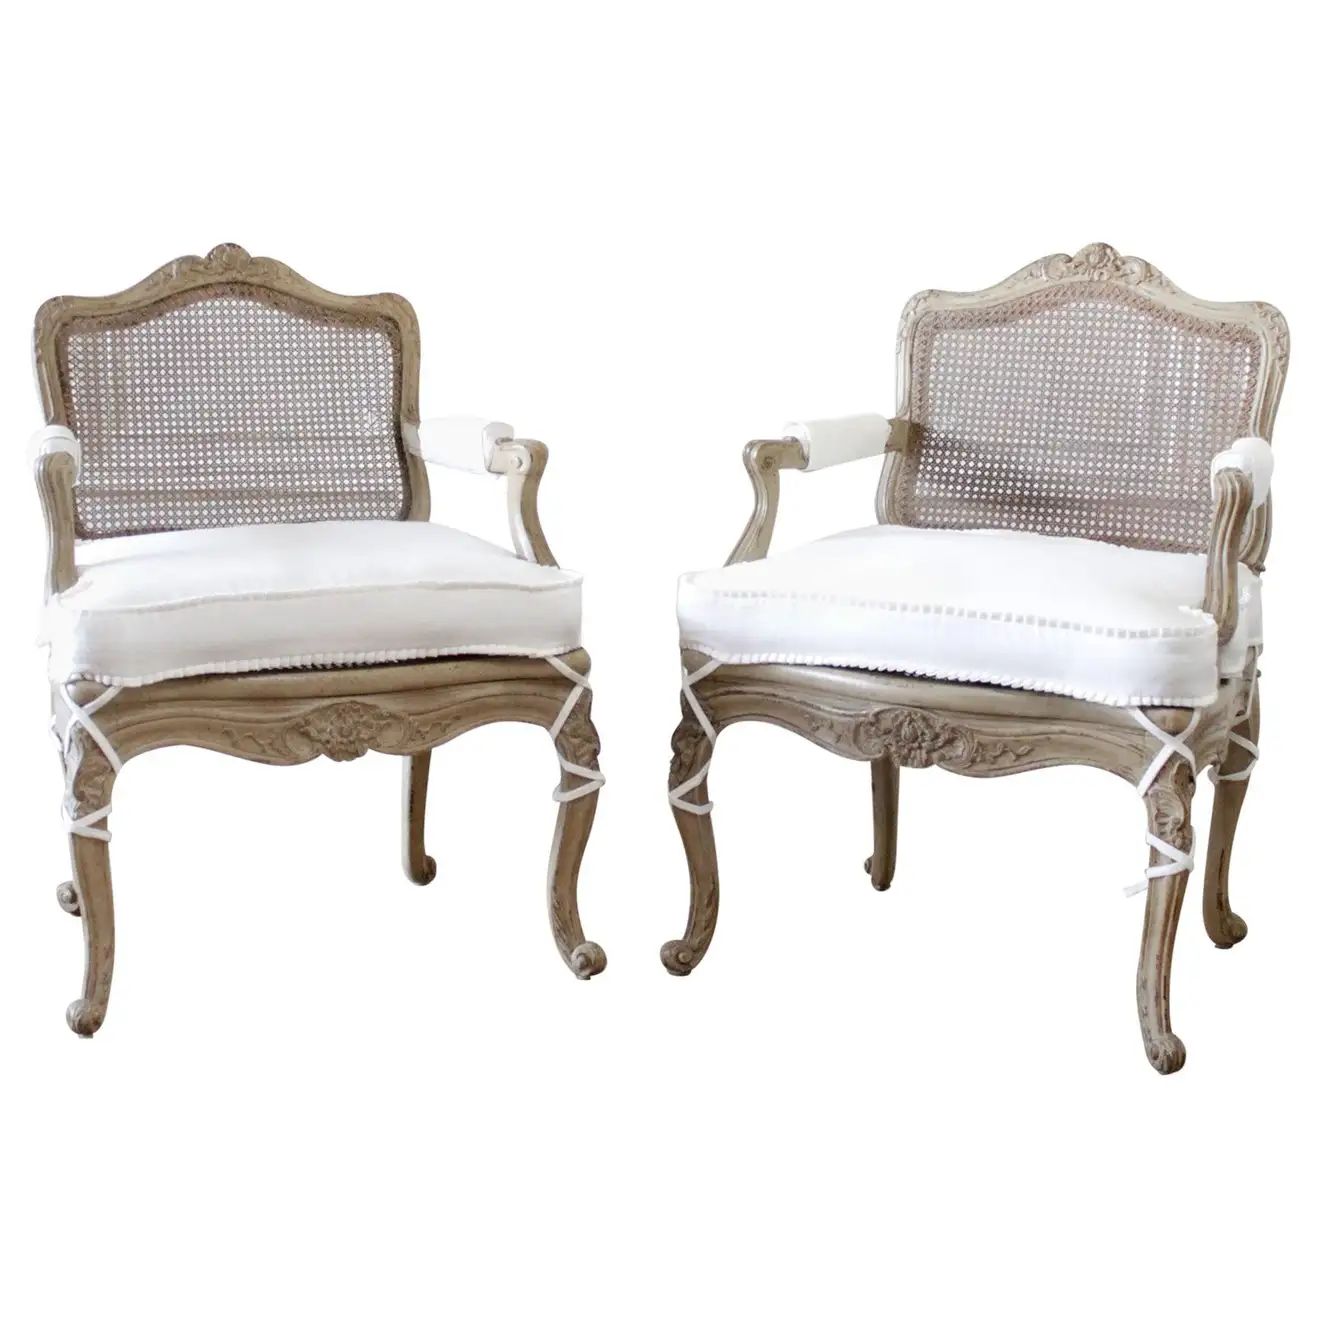 Antique French Armchair in Original Painted Finish and White Linen | 1stDibs